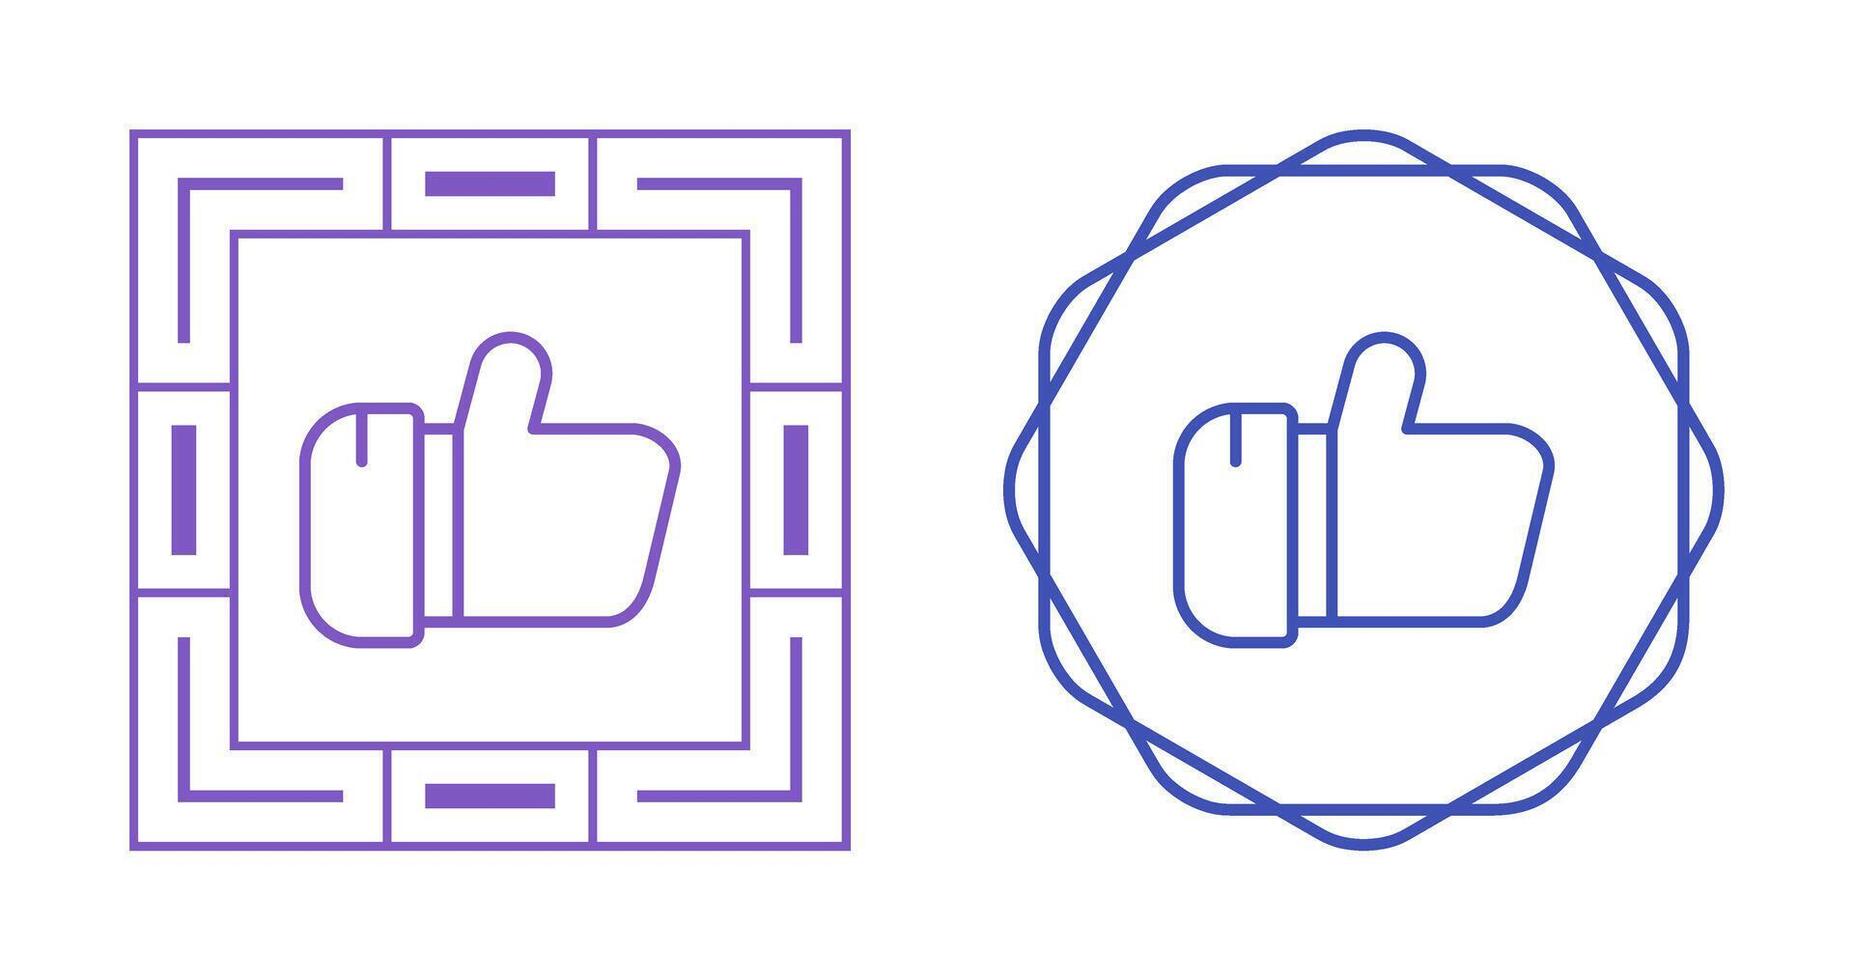 Thumbs Up Vector Icon